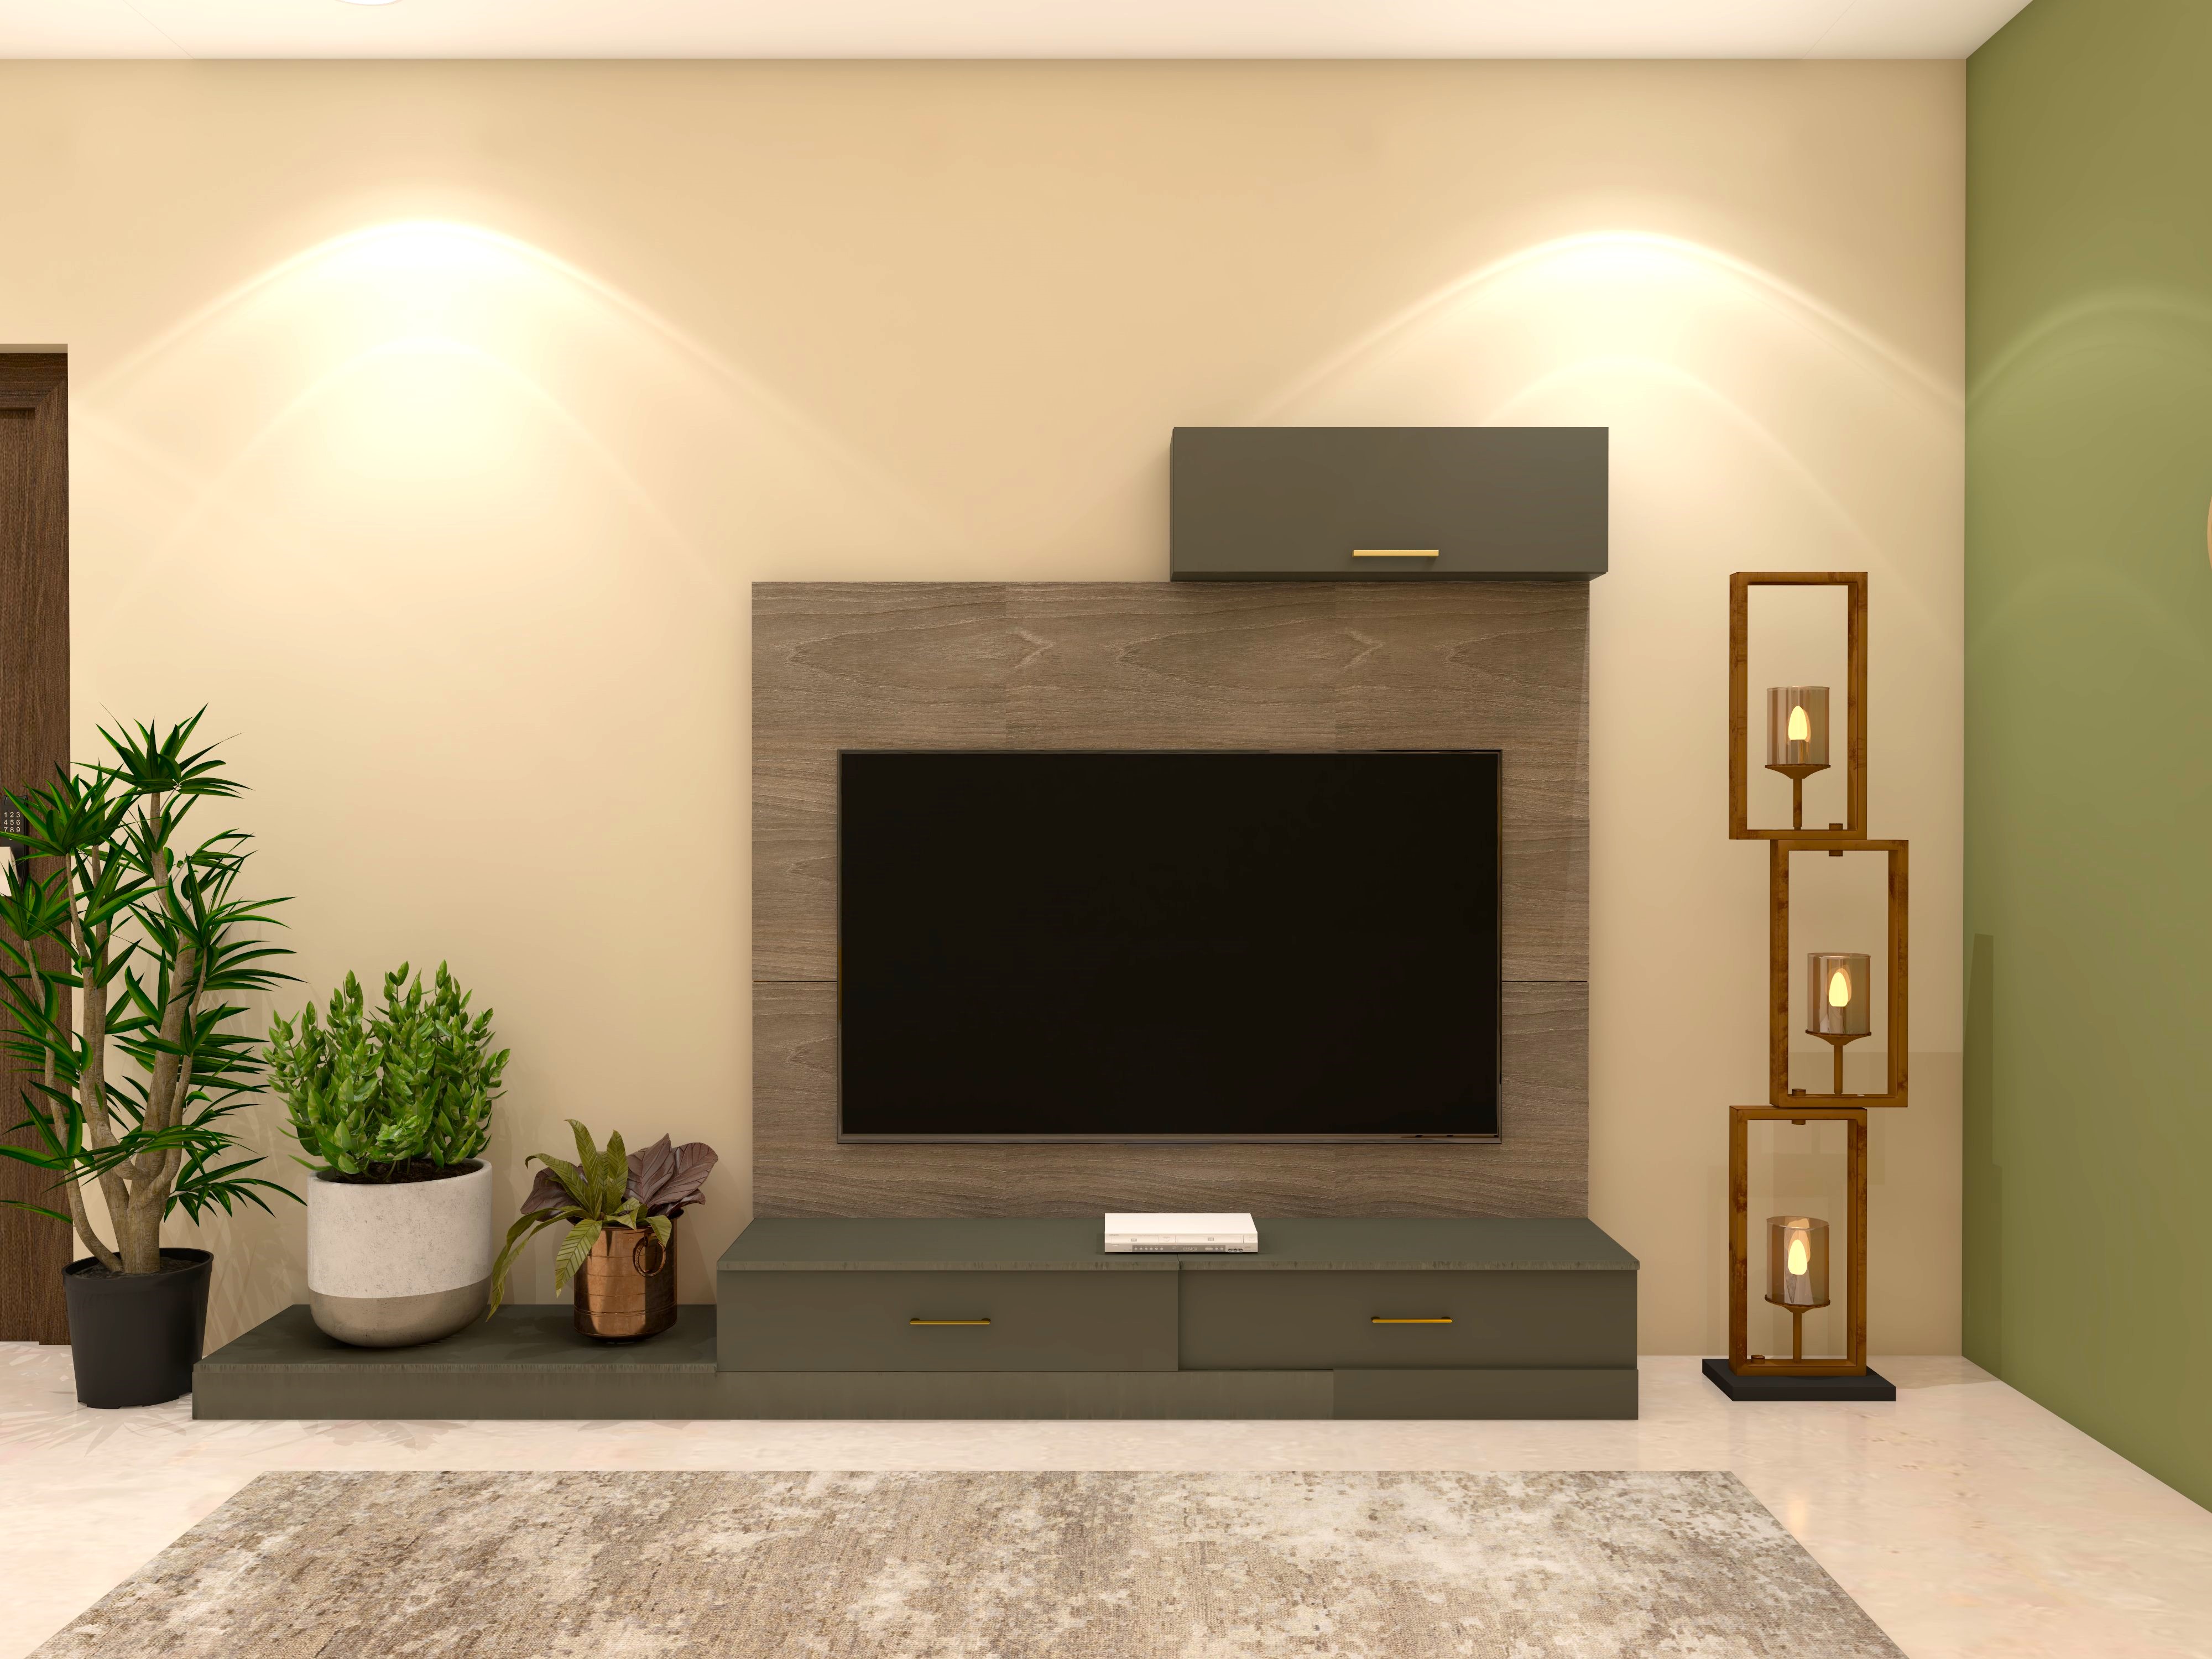 Wooden TV unit design with drawers and plants-Beautiful Homes